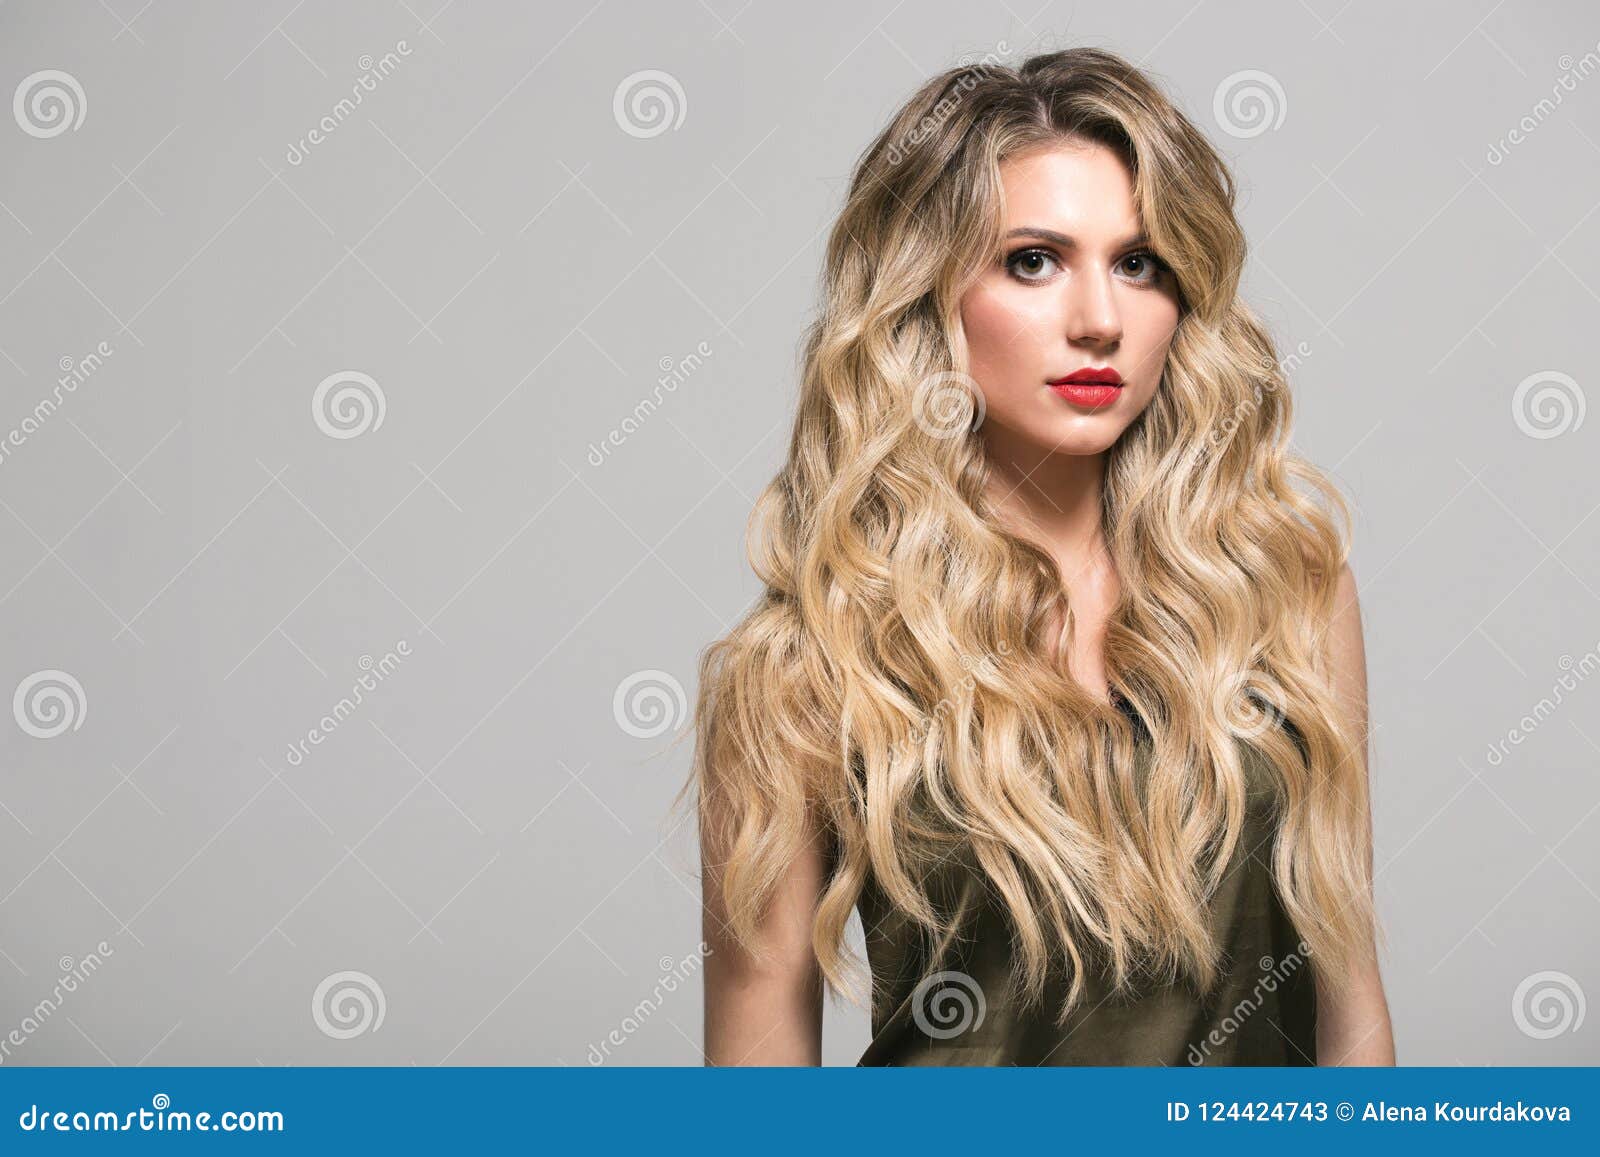 10. Blonde Teen Girl with Wavy Hair - wide 5